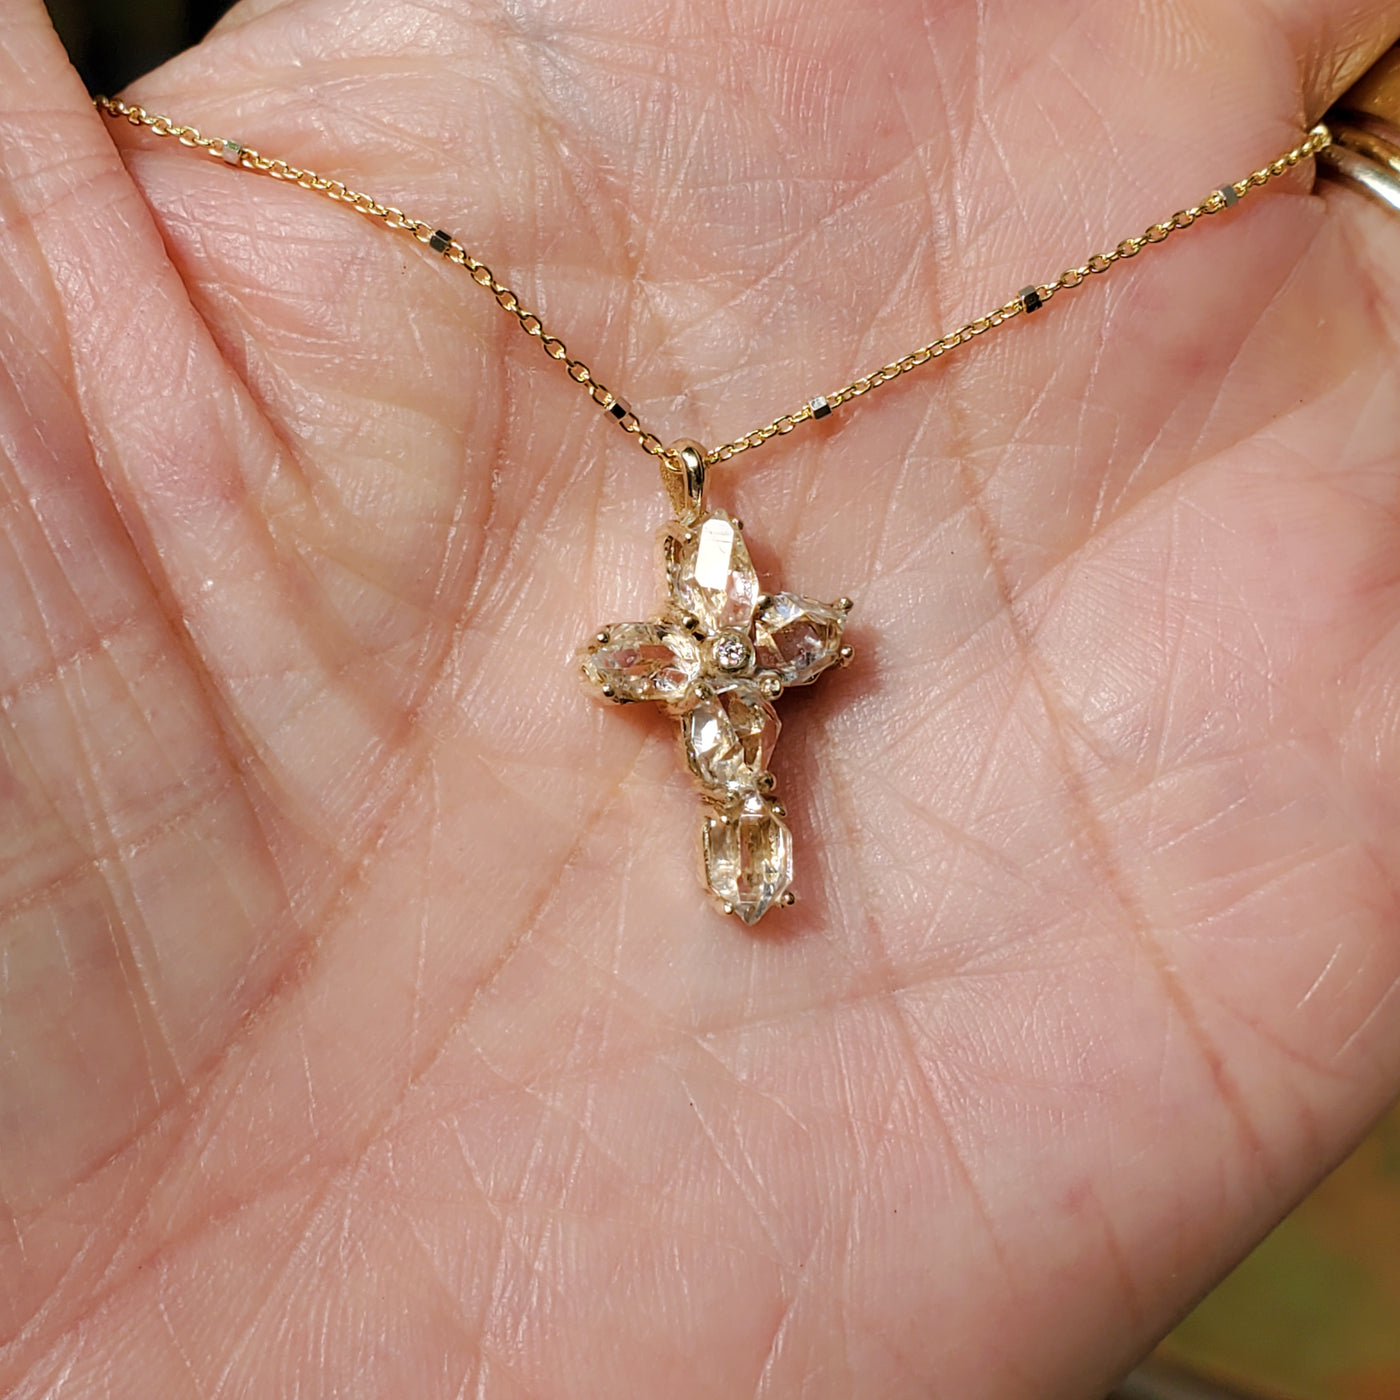 Guardian Herkimer Diamond Cross Necklace (limited edition)